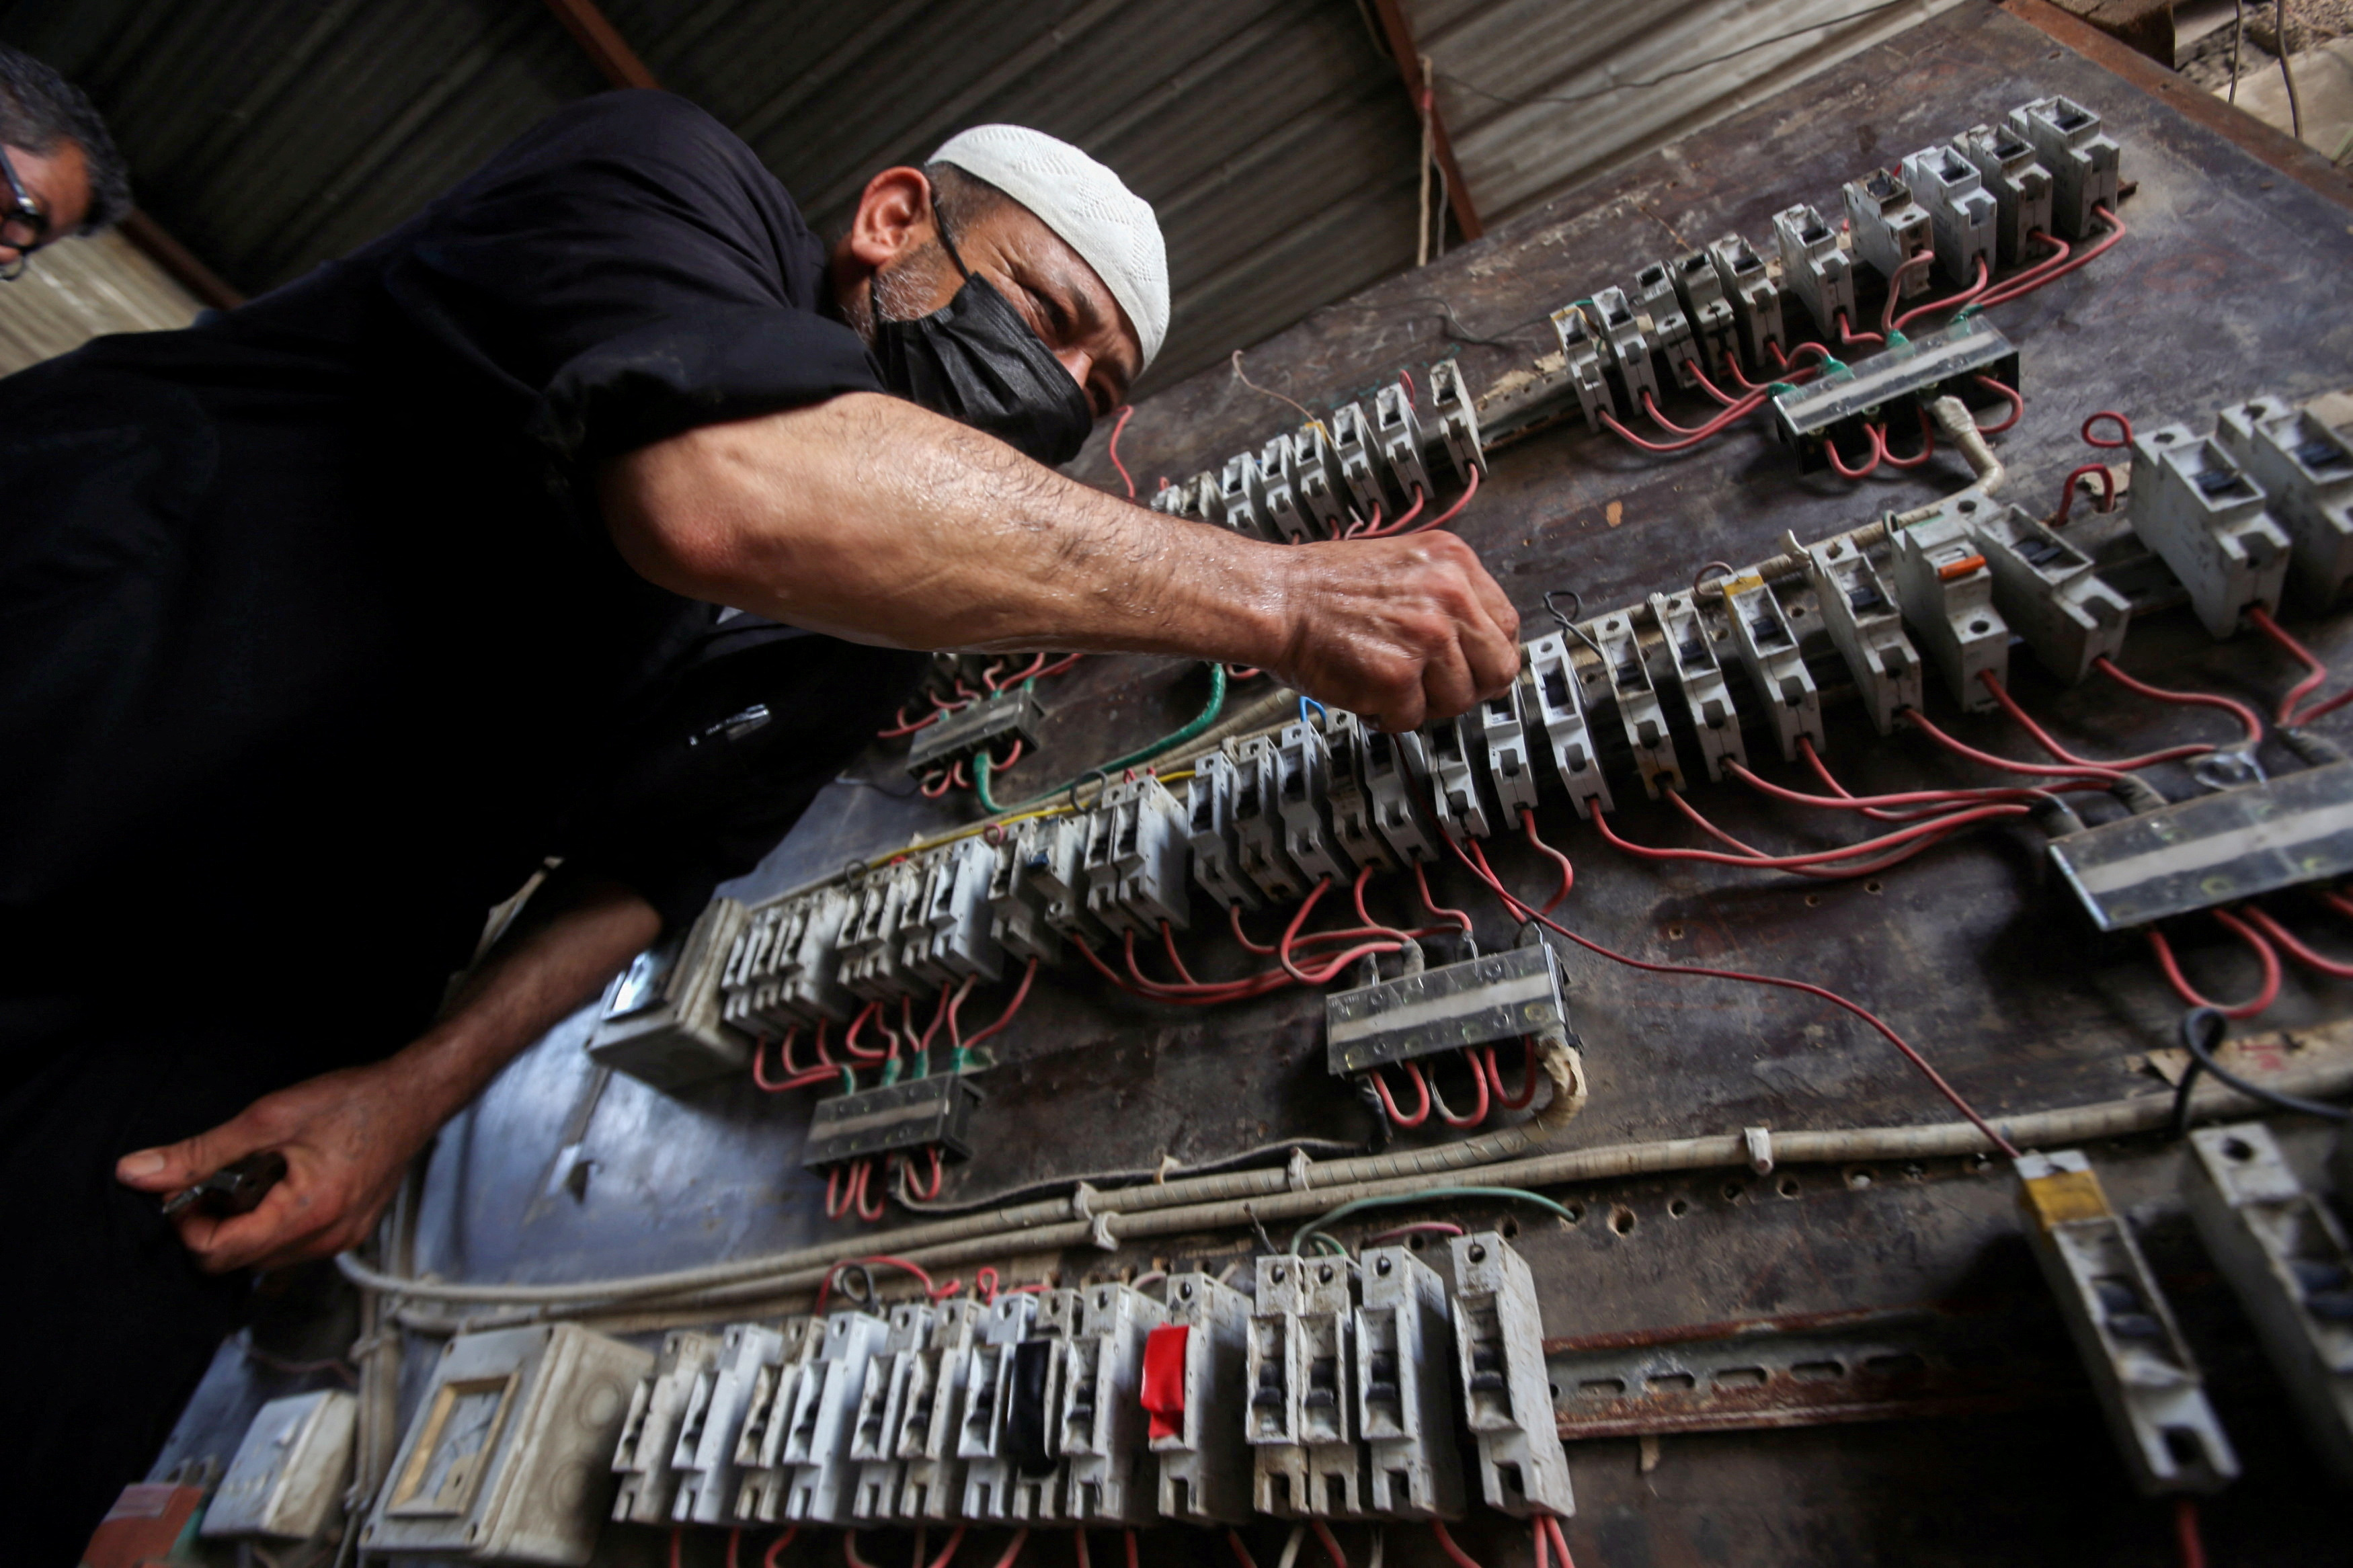 A man works on an electrical generator board during power outages in Basra